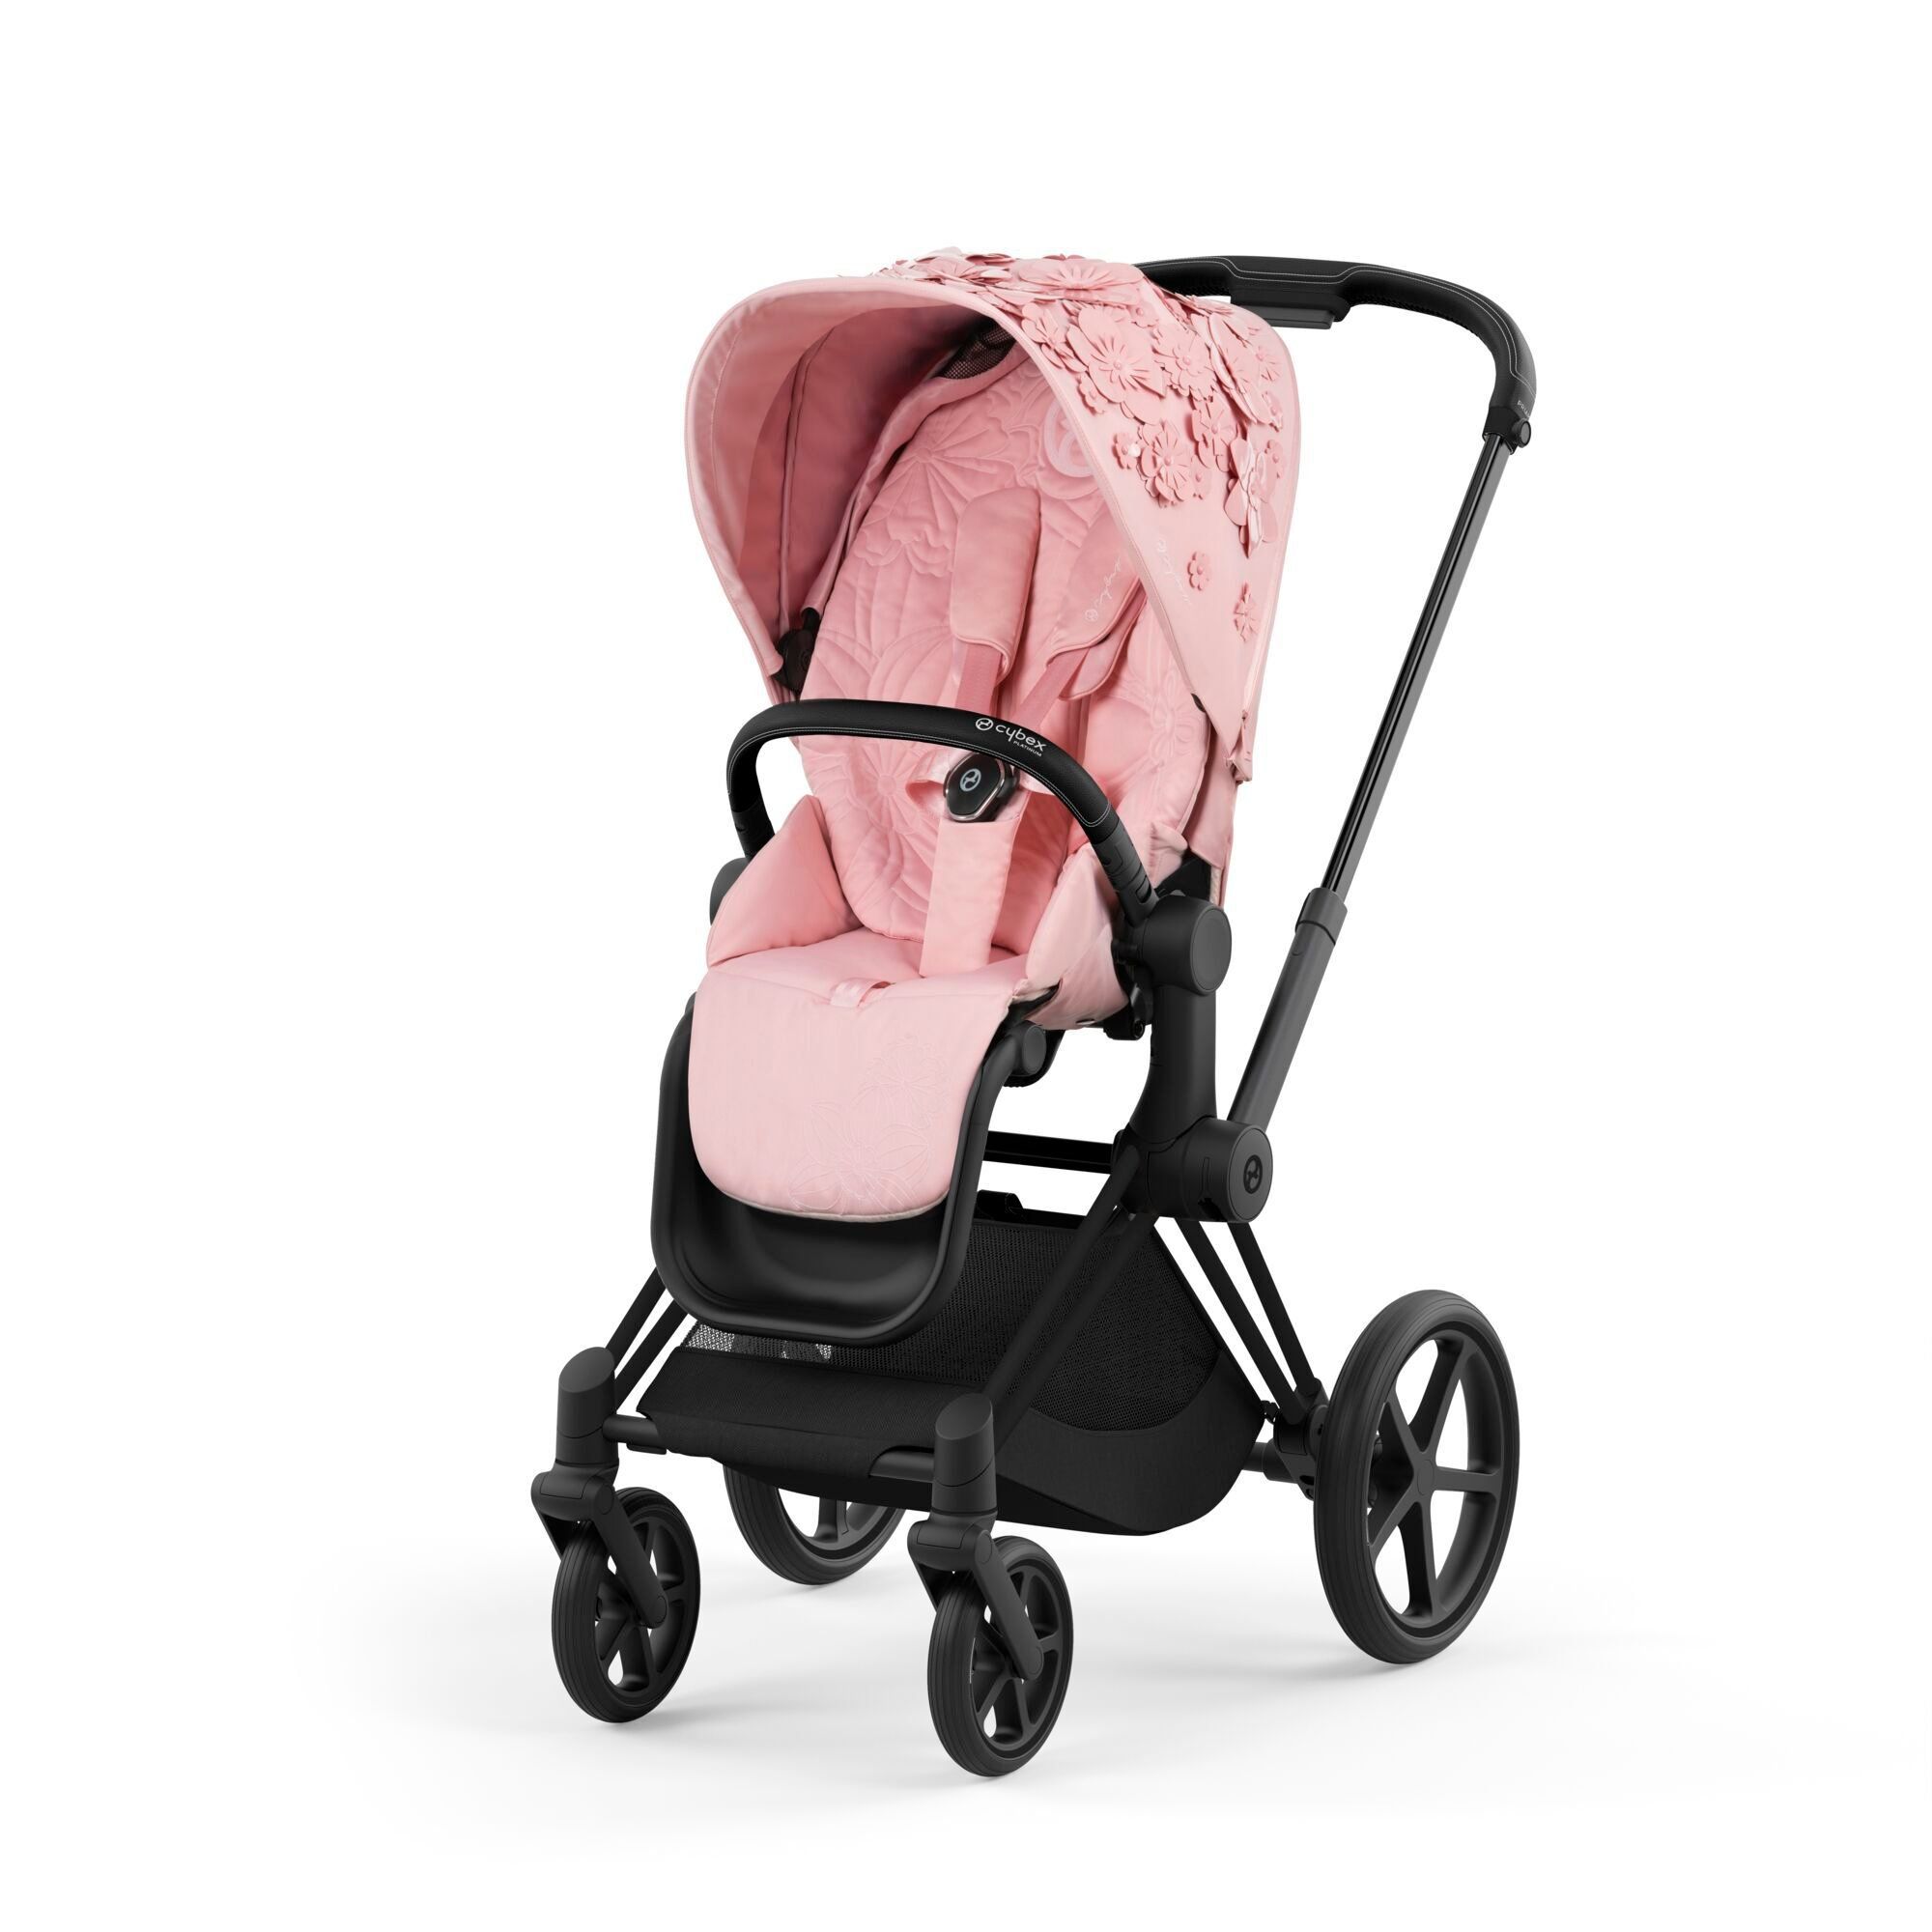  Đệm ghế xe đẩy Cybex Priam 3 Limited Edition - Simply Flowers Light Pink 